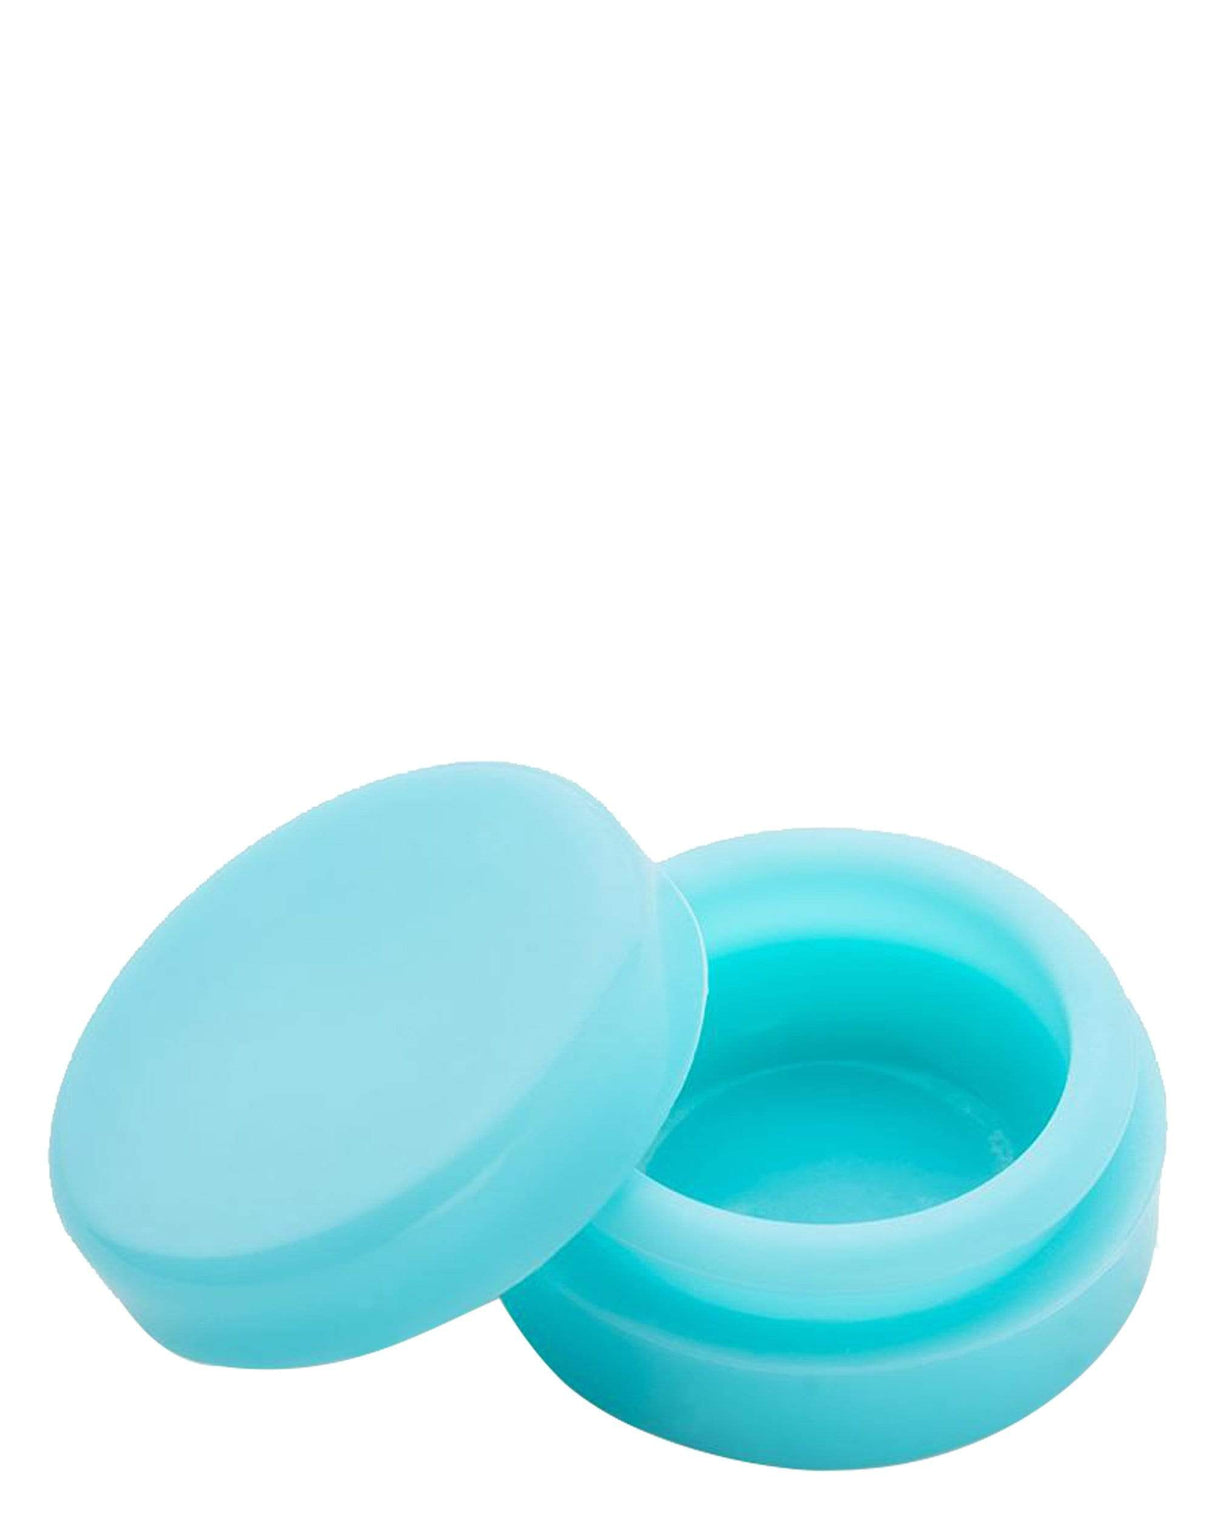 Ooze - Ozone Silicone Bong in Teal, Top View Showing Stash Storage Feature